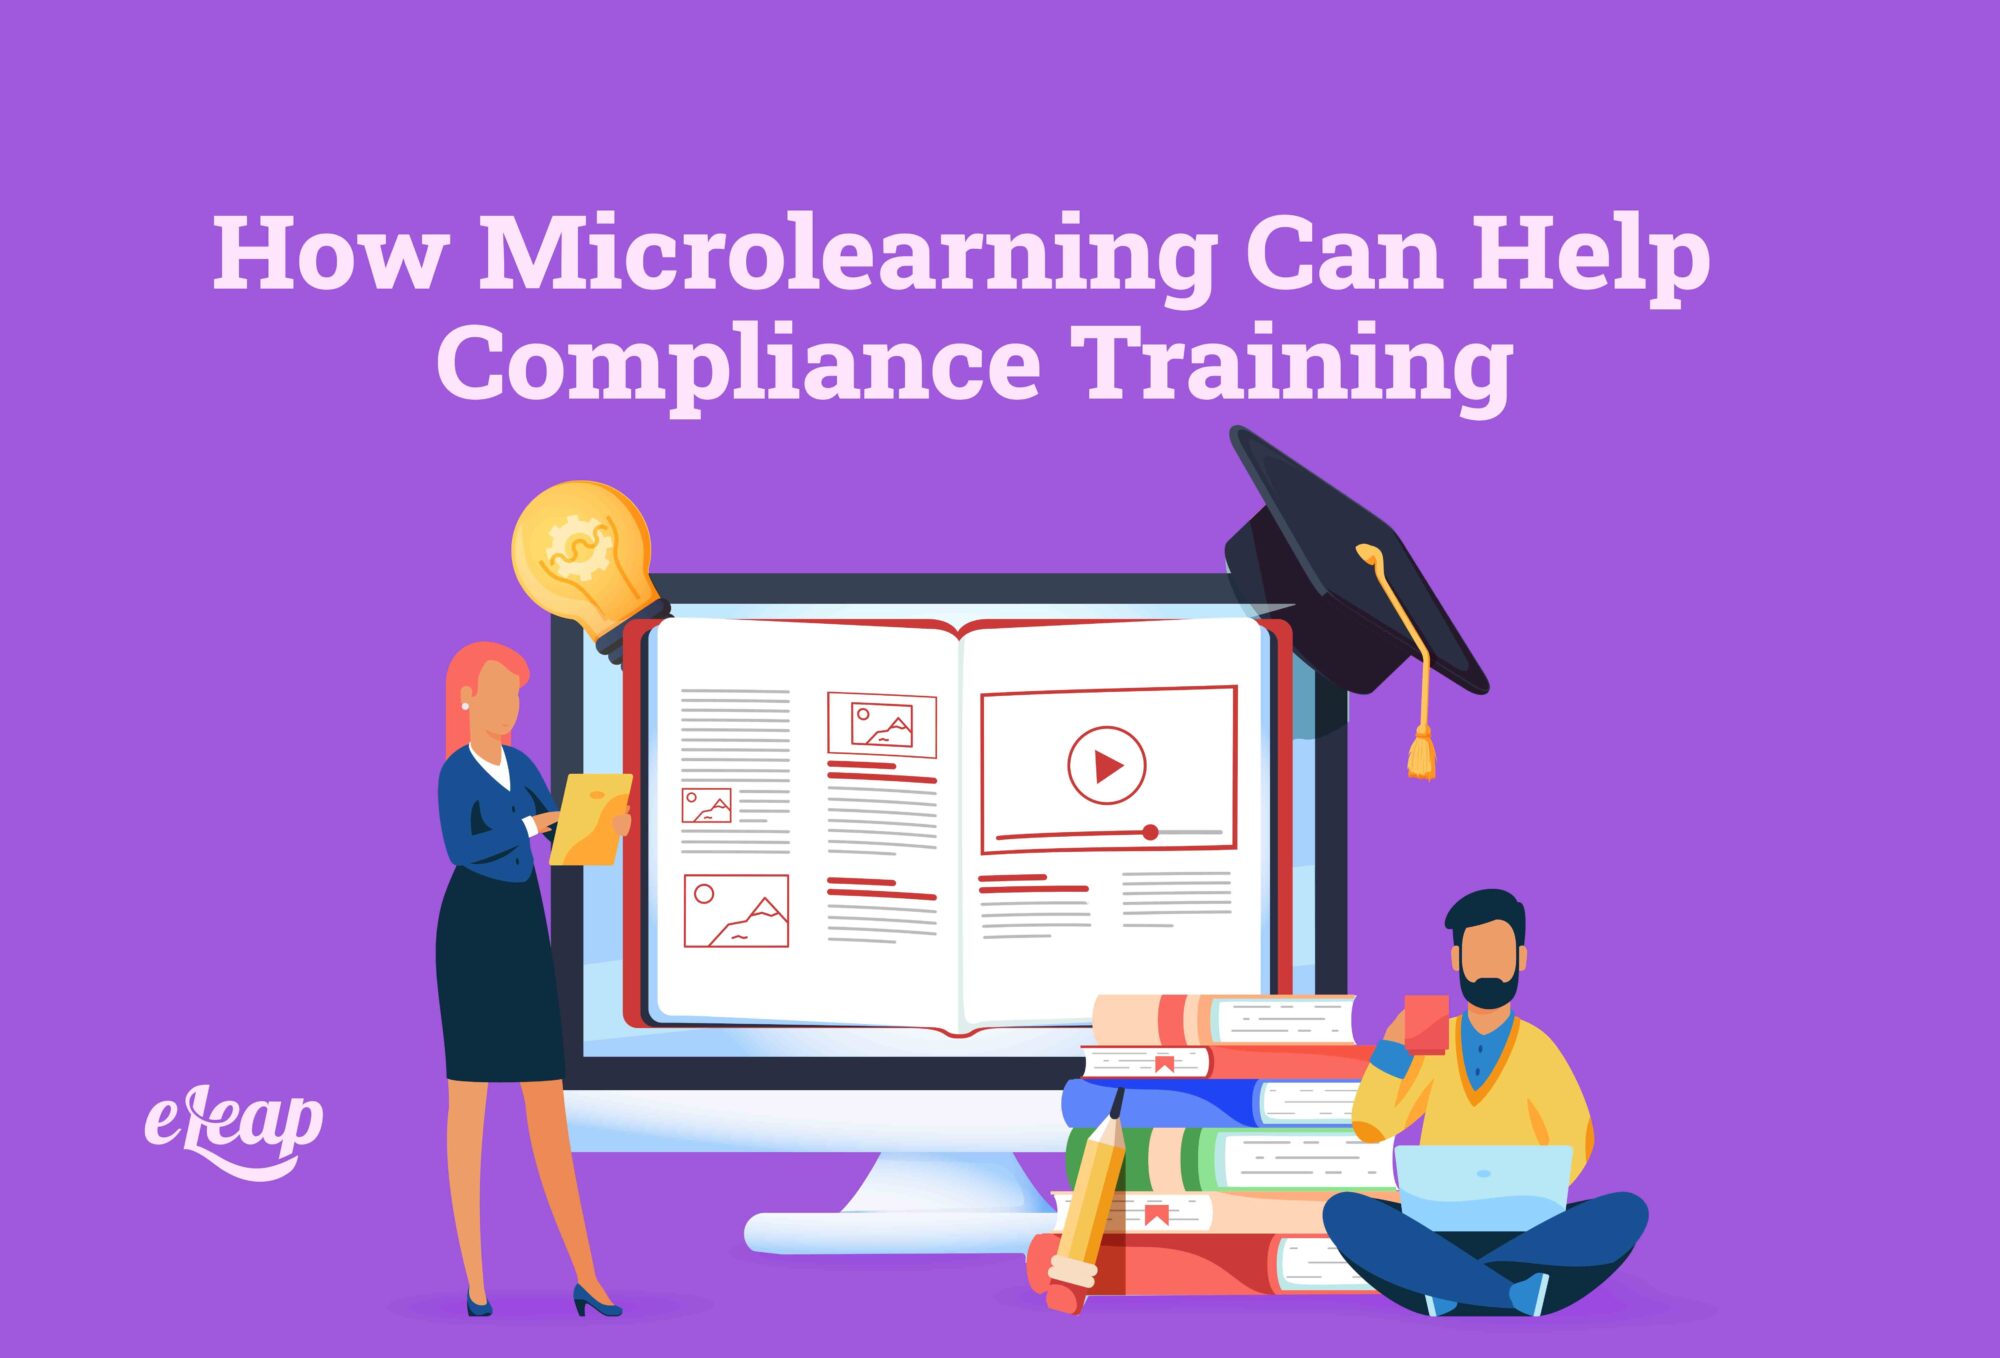 How Microlearning Can Help Compliance Training